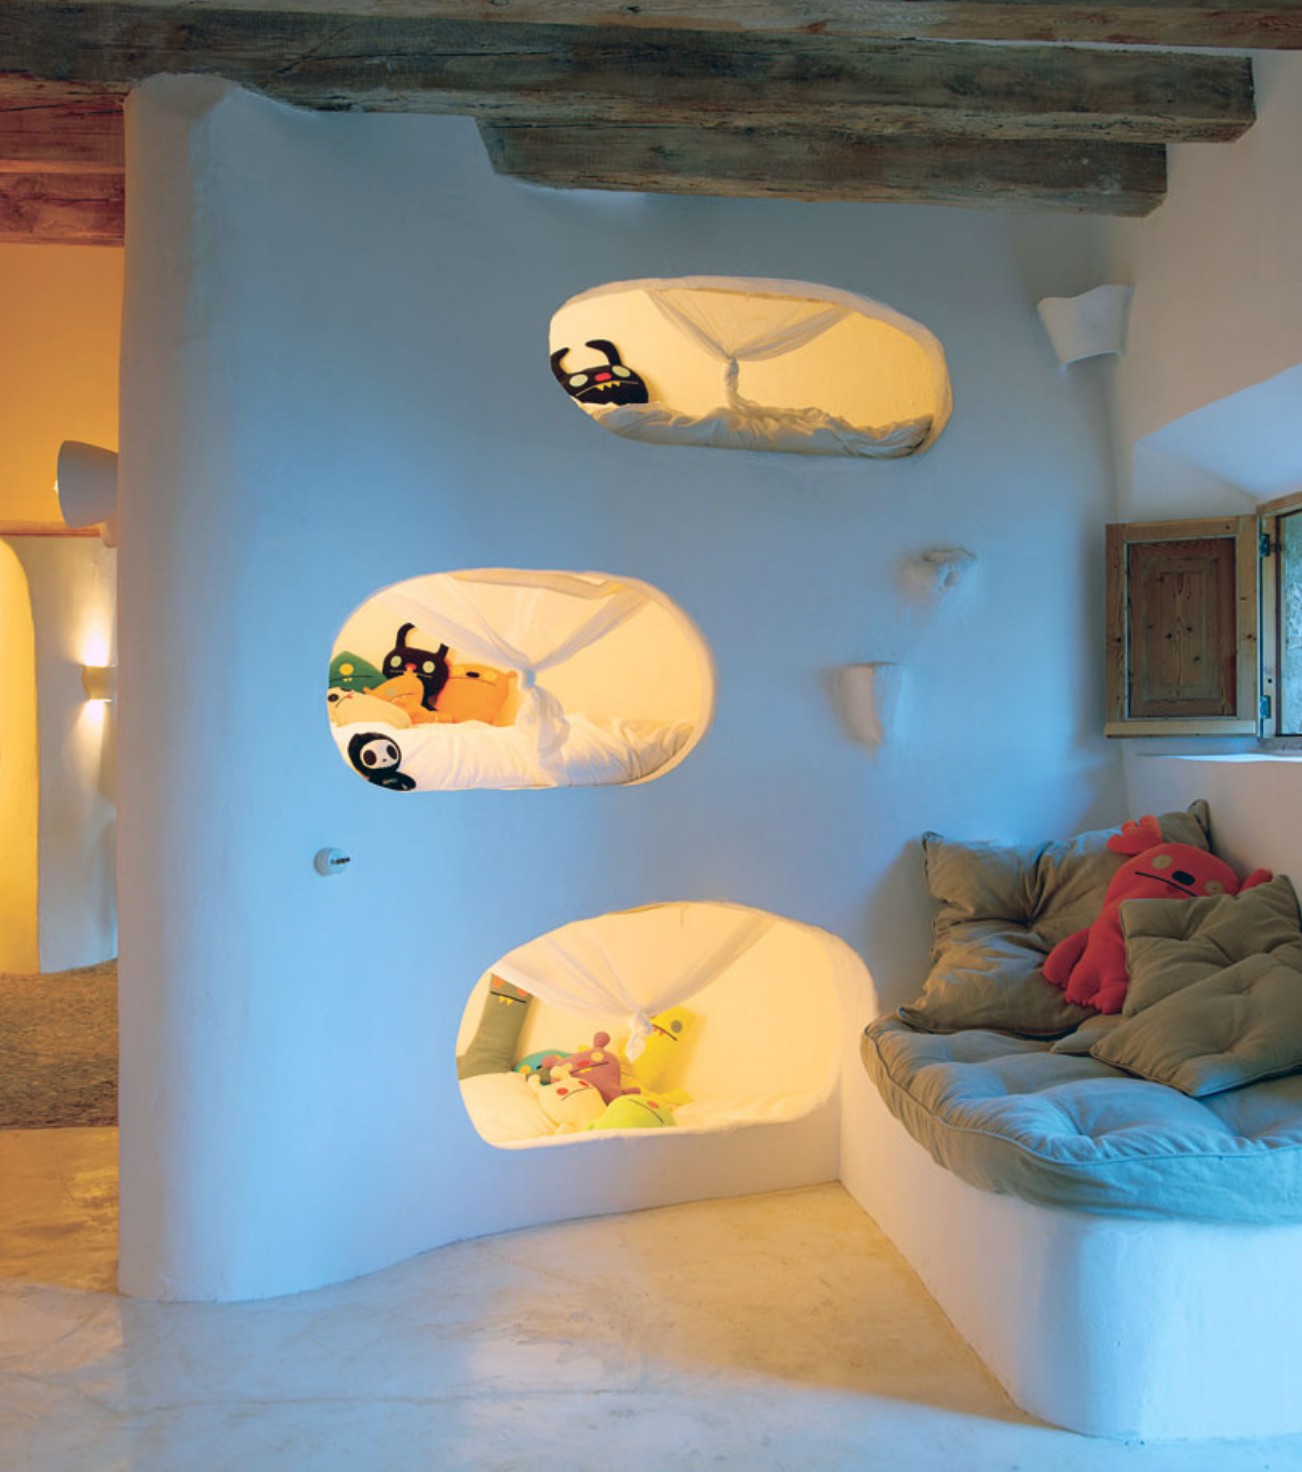 Cave Kids For Breathtaking Cave Kids Room Furniture For 3 Boys Design Ideas With Relaxing Rusty White Wall Paint Idea And Sweet Niches Wall Shelves Design Along With Rustic Wooden Beams Ceiling And Fantasy Doll Furniture Composing The Special Type Of Kids Room Furniture